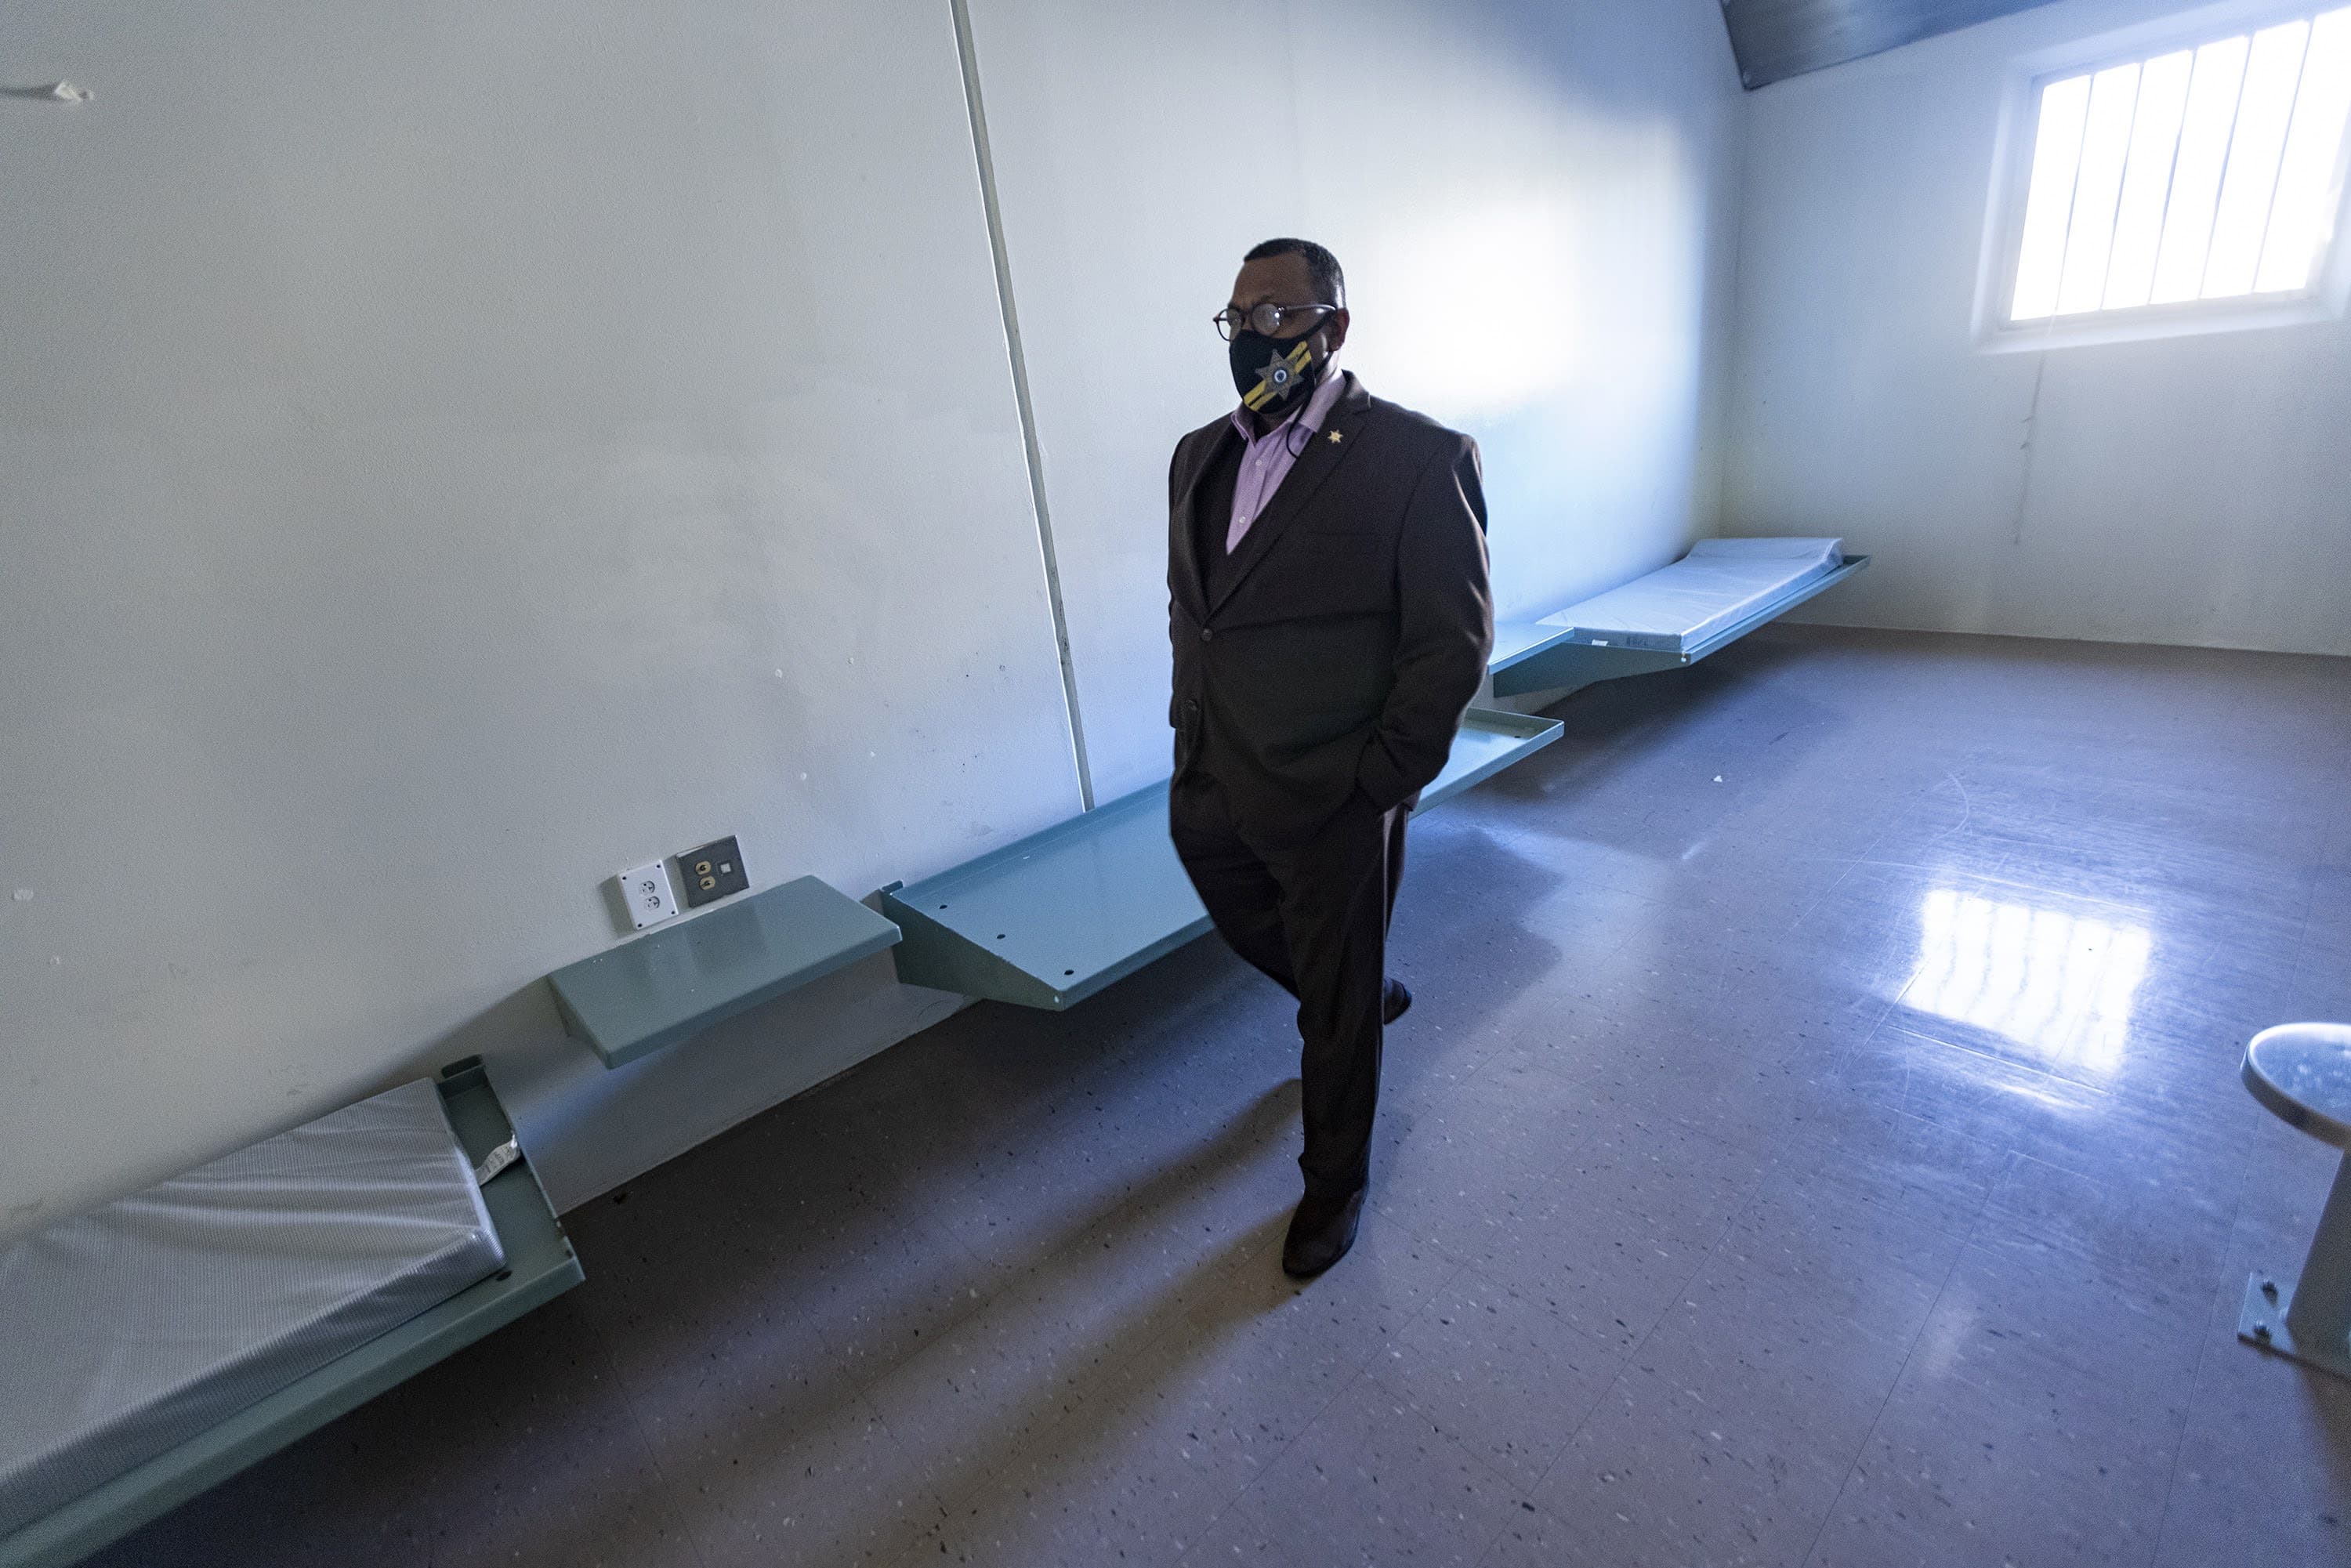 Sheriff Steven Tompkins walks through one of the jail cells he says will be turned into a room that will house some people without homes who live in tents around Boston's so-called "Mass. and Cass" area. (Jesse Costa/WBUR)